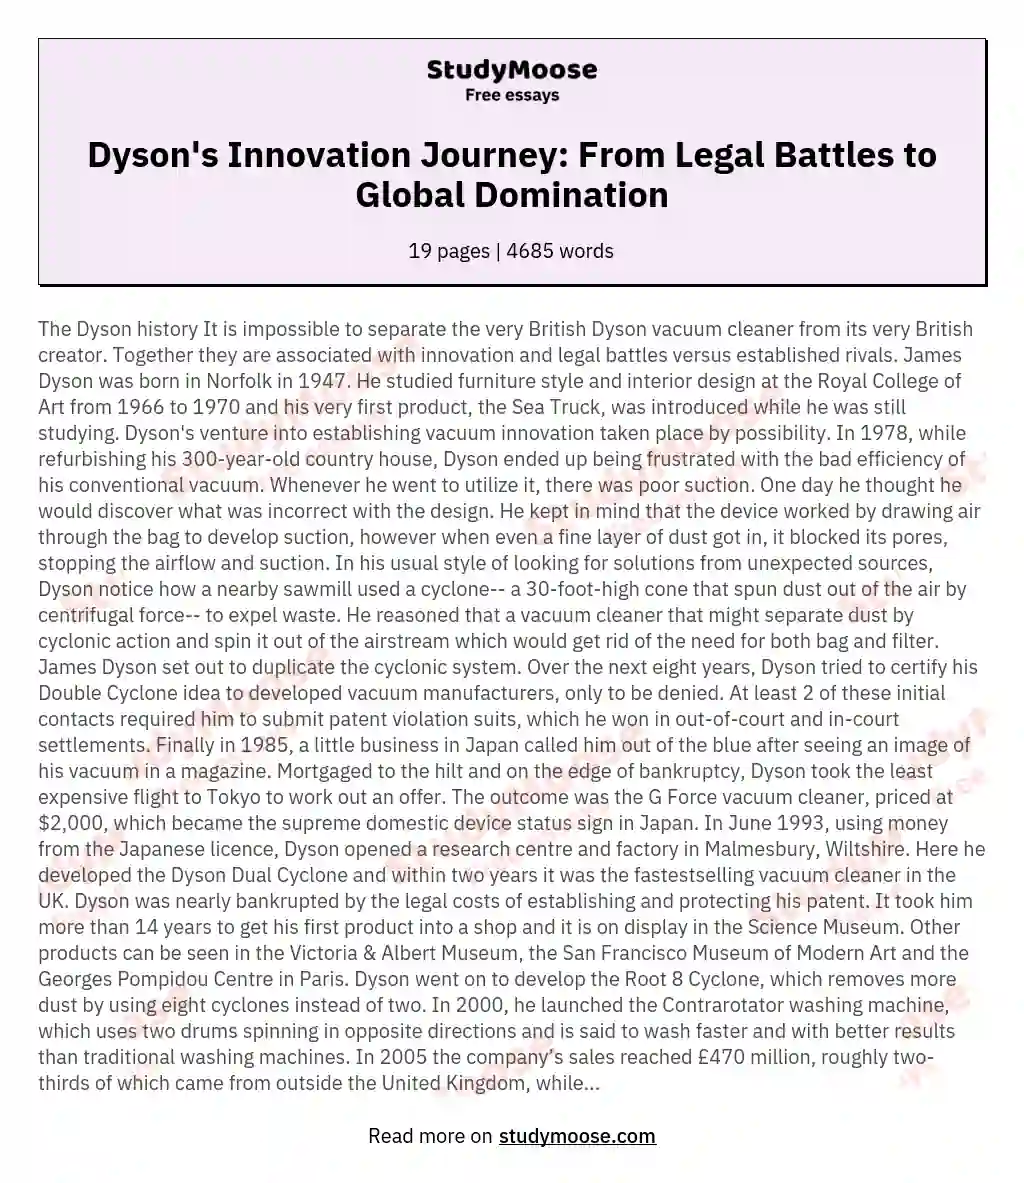 cornell dyson supplemental essay examples